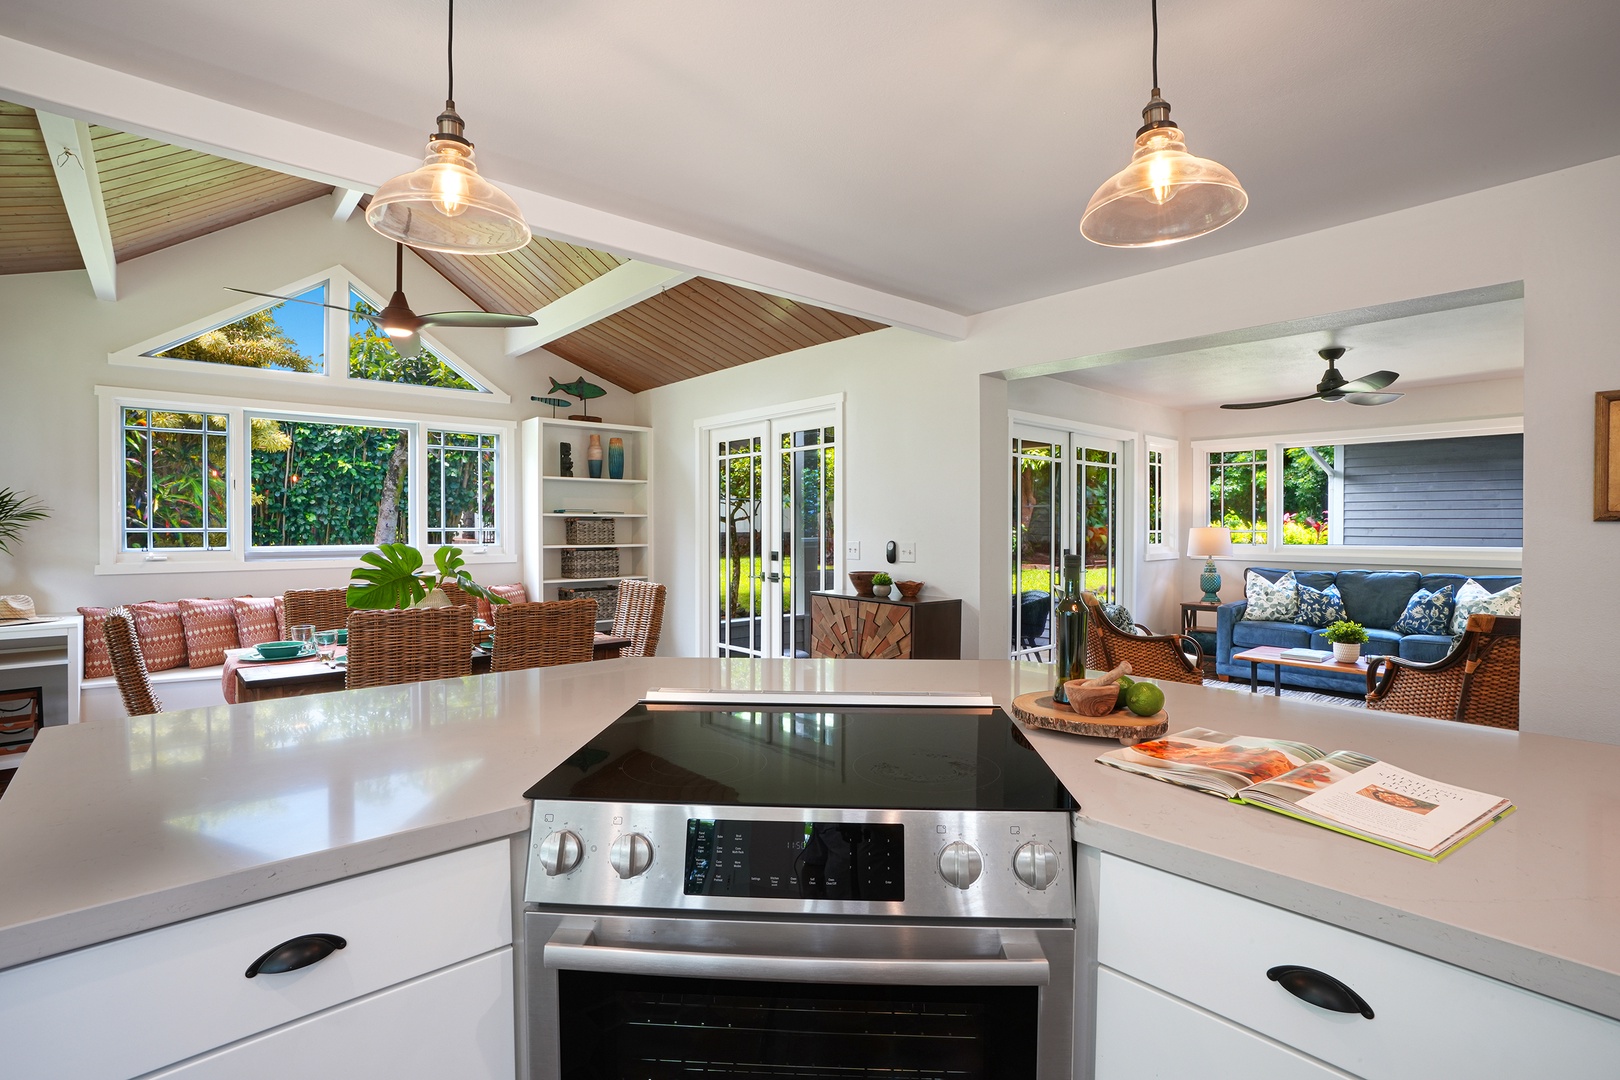 Princeville Vacation Rentals, Kaiana Villa - Top appliances will make it easy to cook for your loved ones